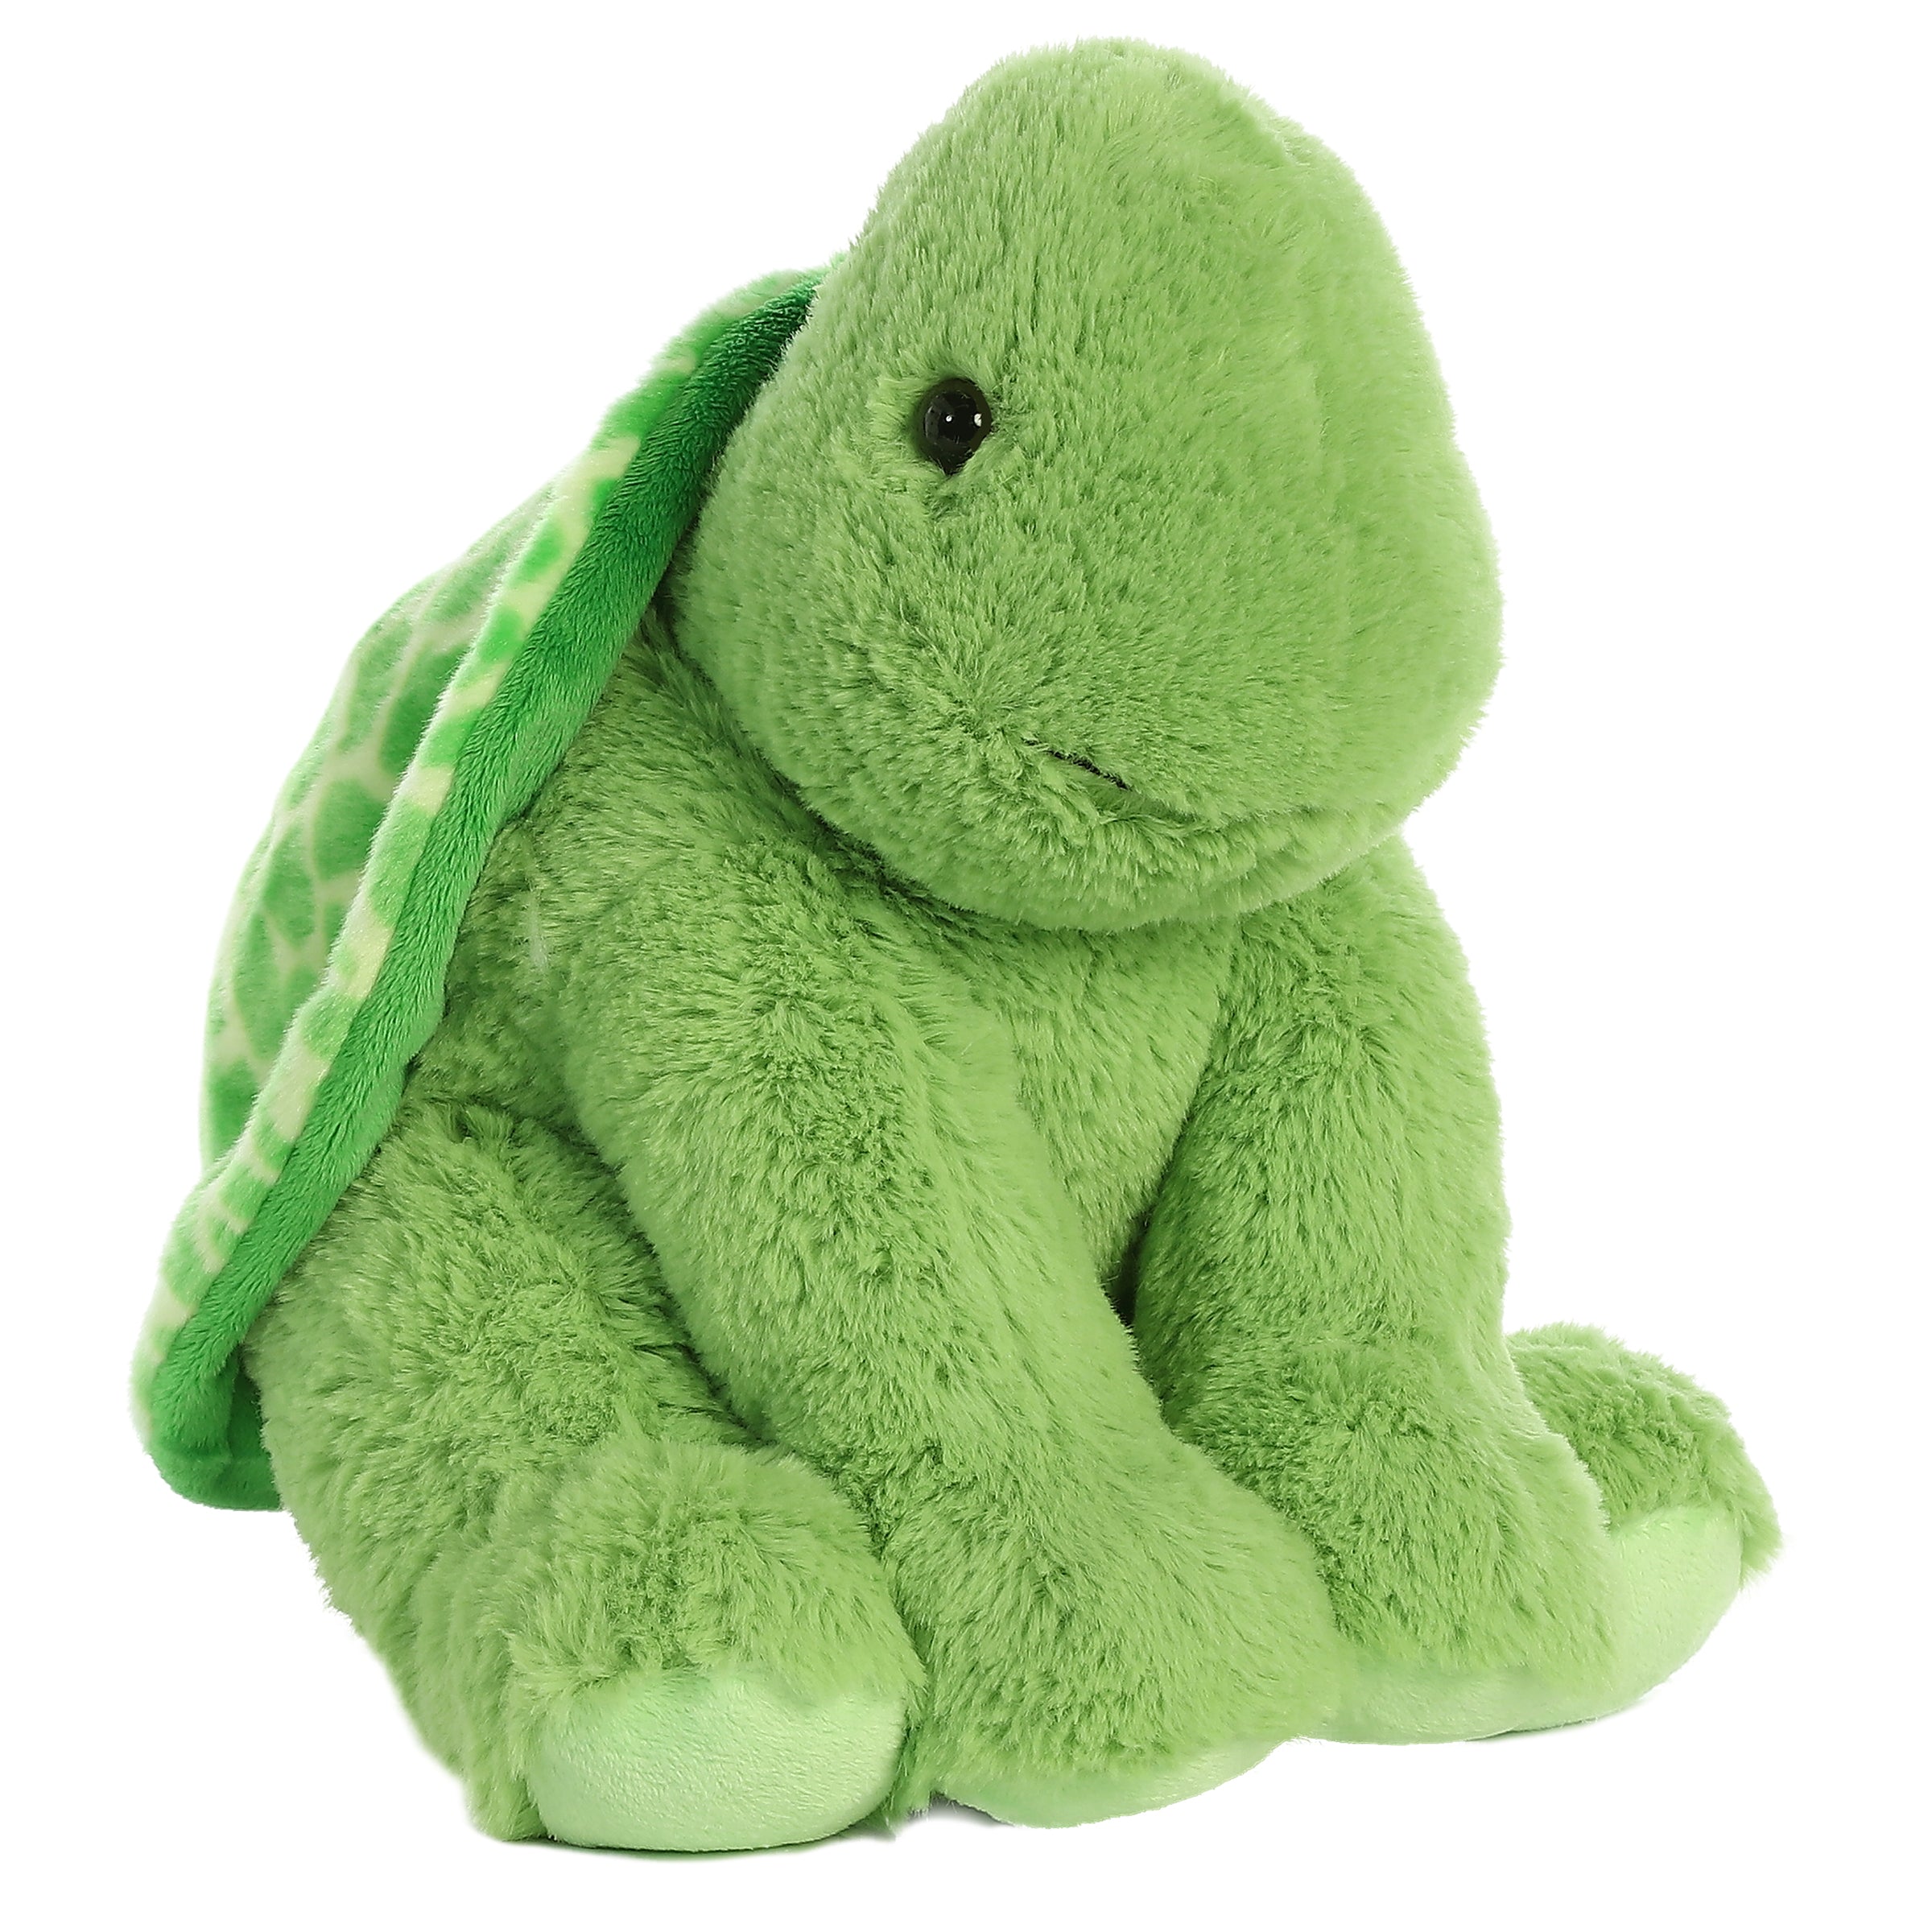 Aurora Snuggly Shell Turtle Plush in leafy-green color, featuring a distinctive plush shell pattern.